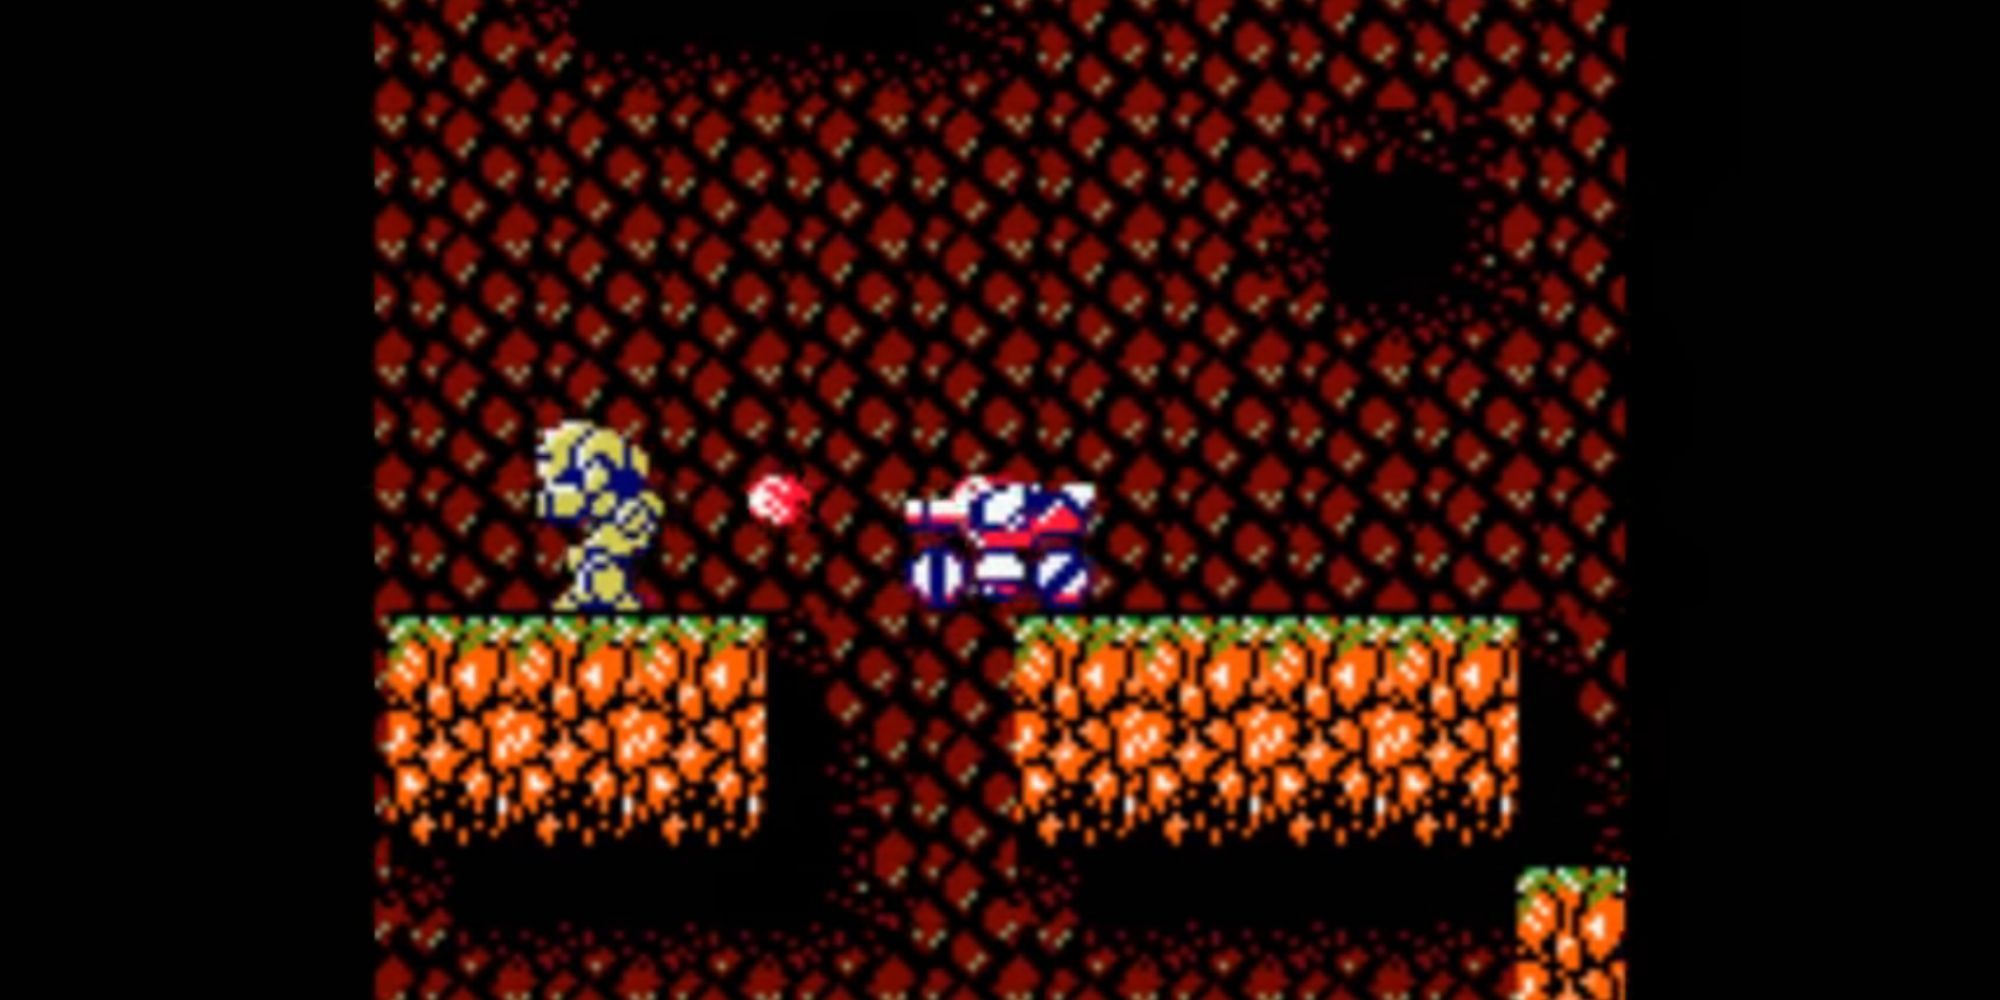 The SOPHIA shoots an enemy from behind in a cave